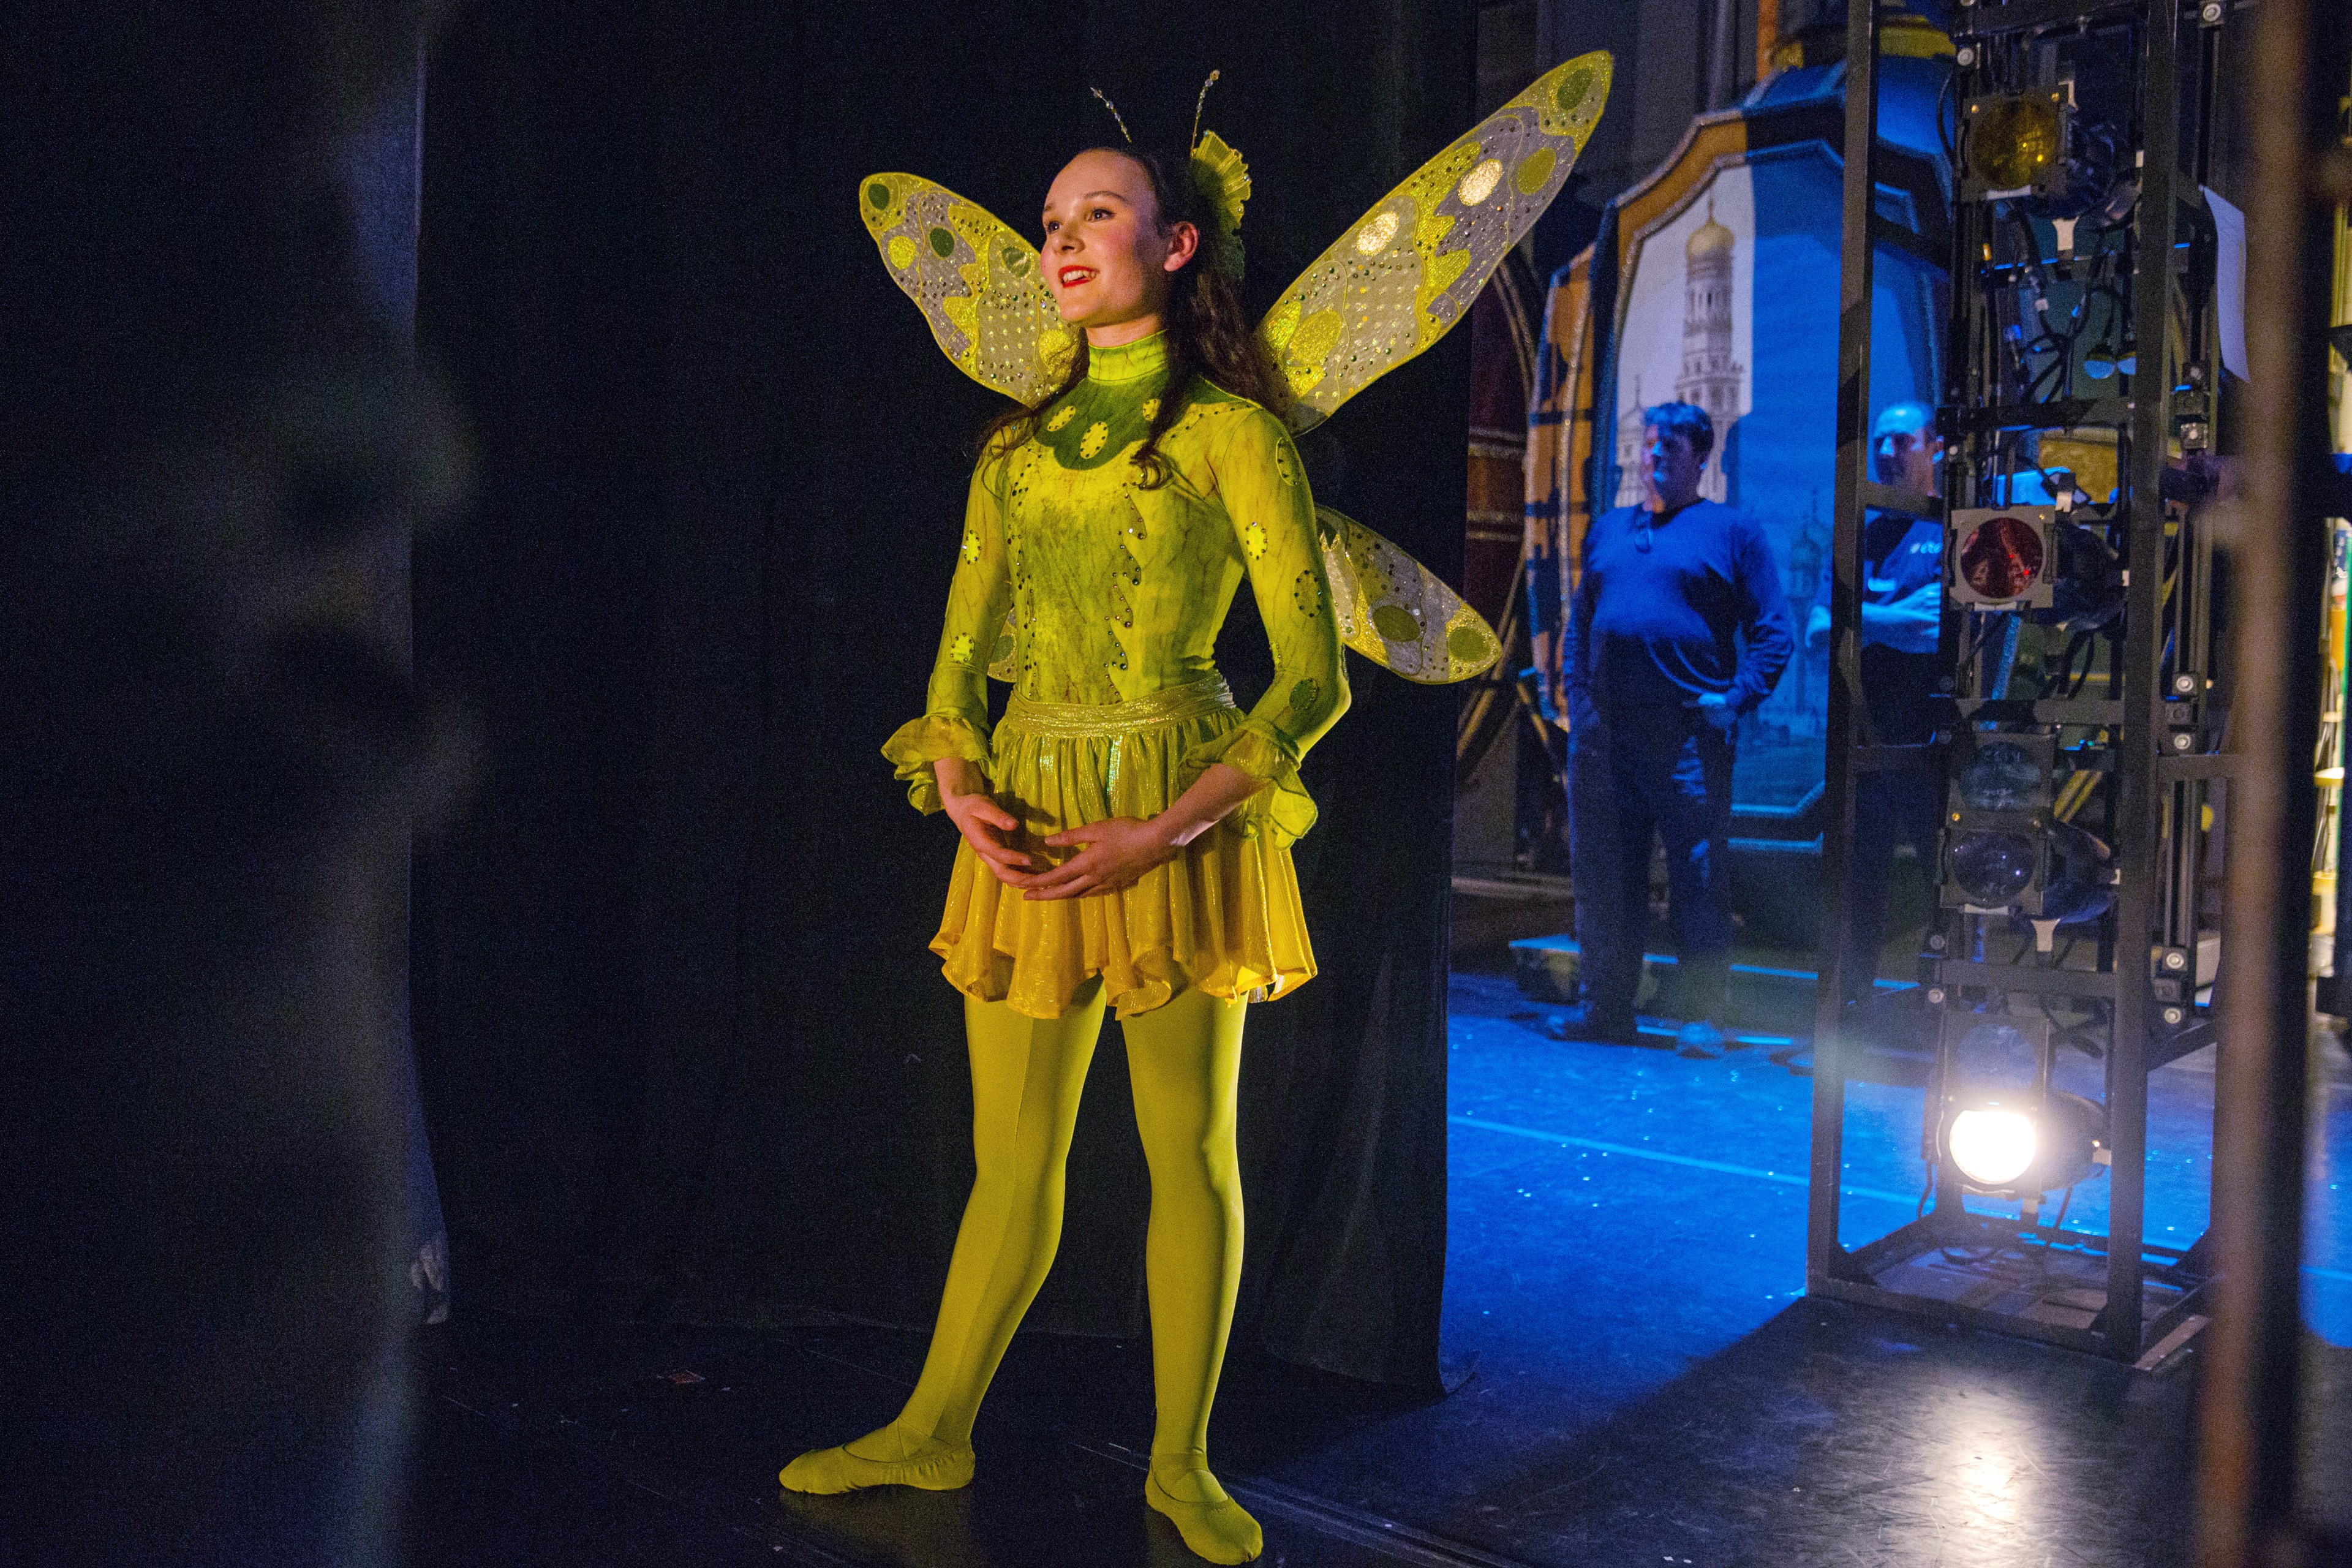 A woman dressed like a green butterfly waits backstage at a theatre